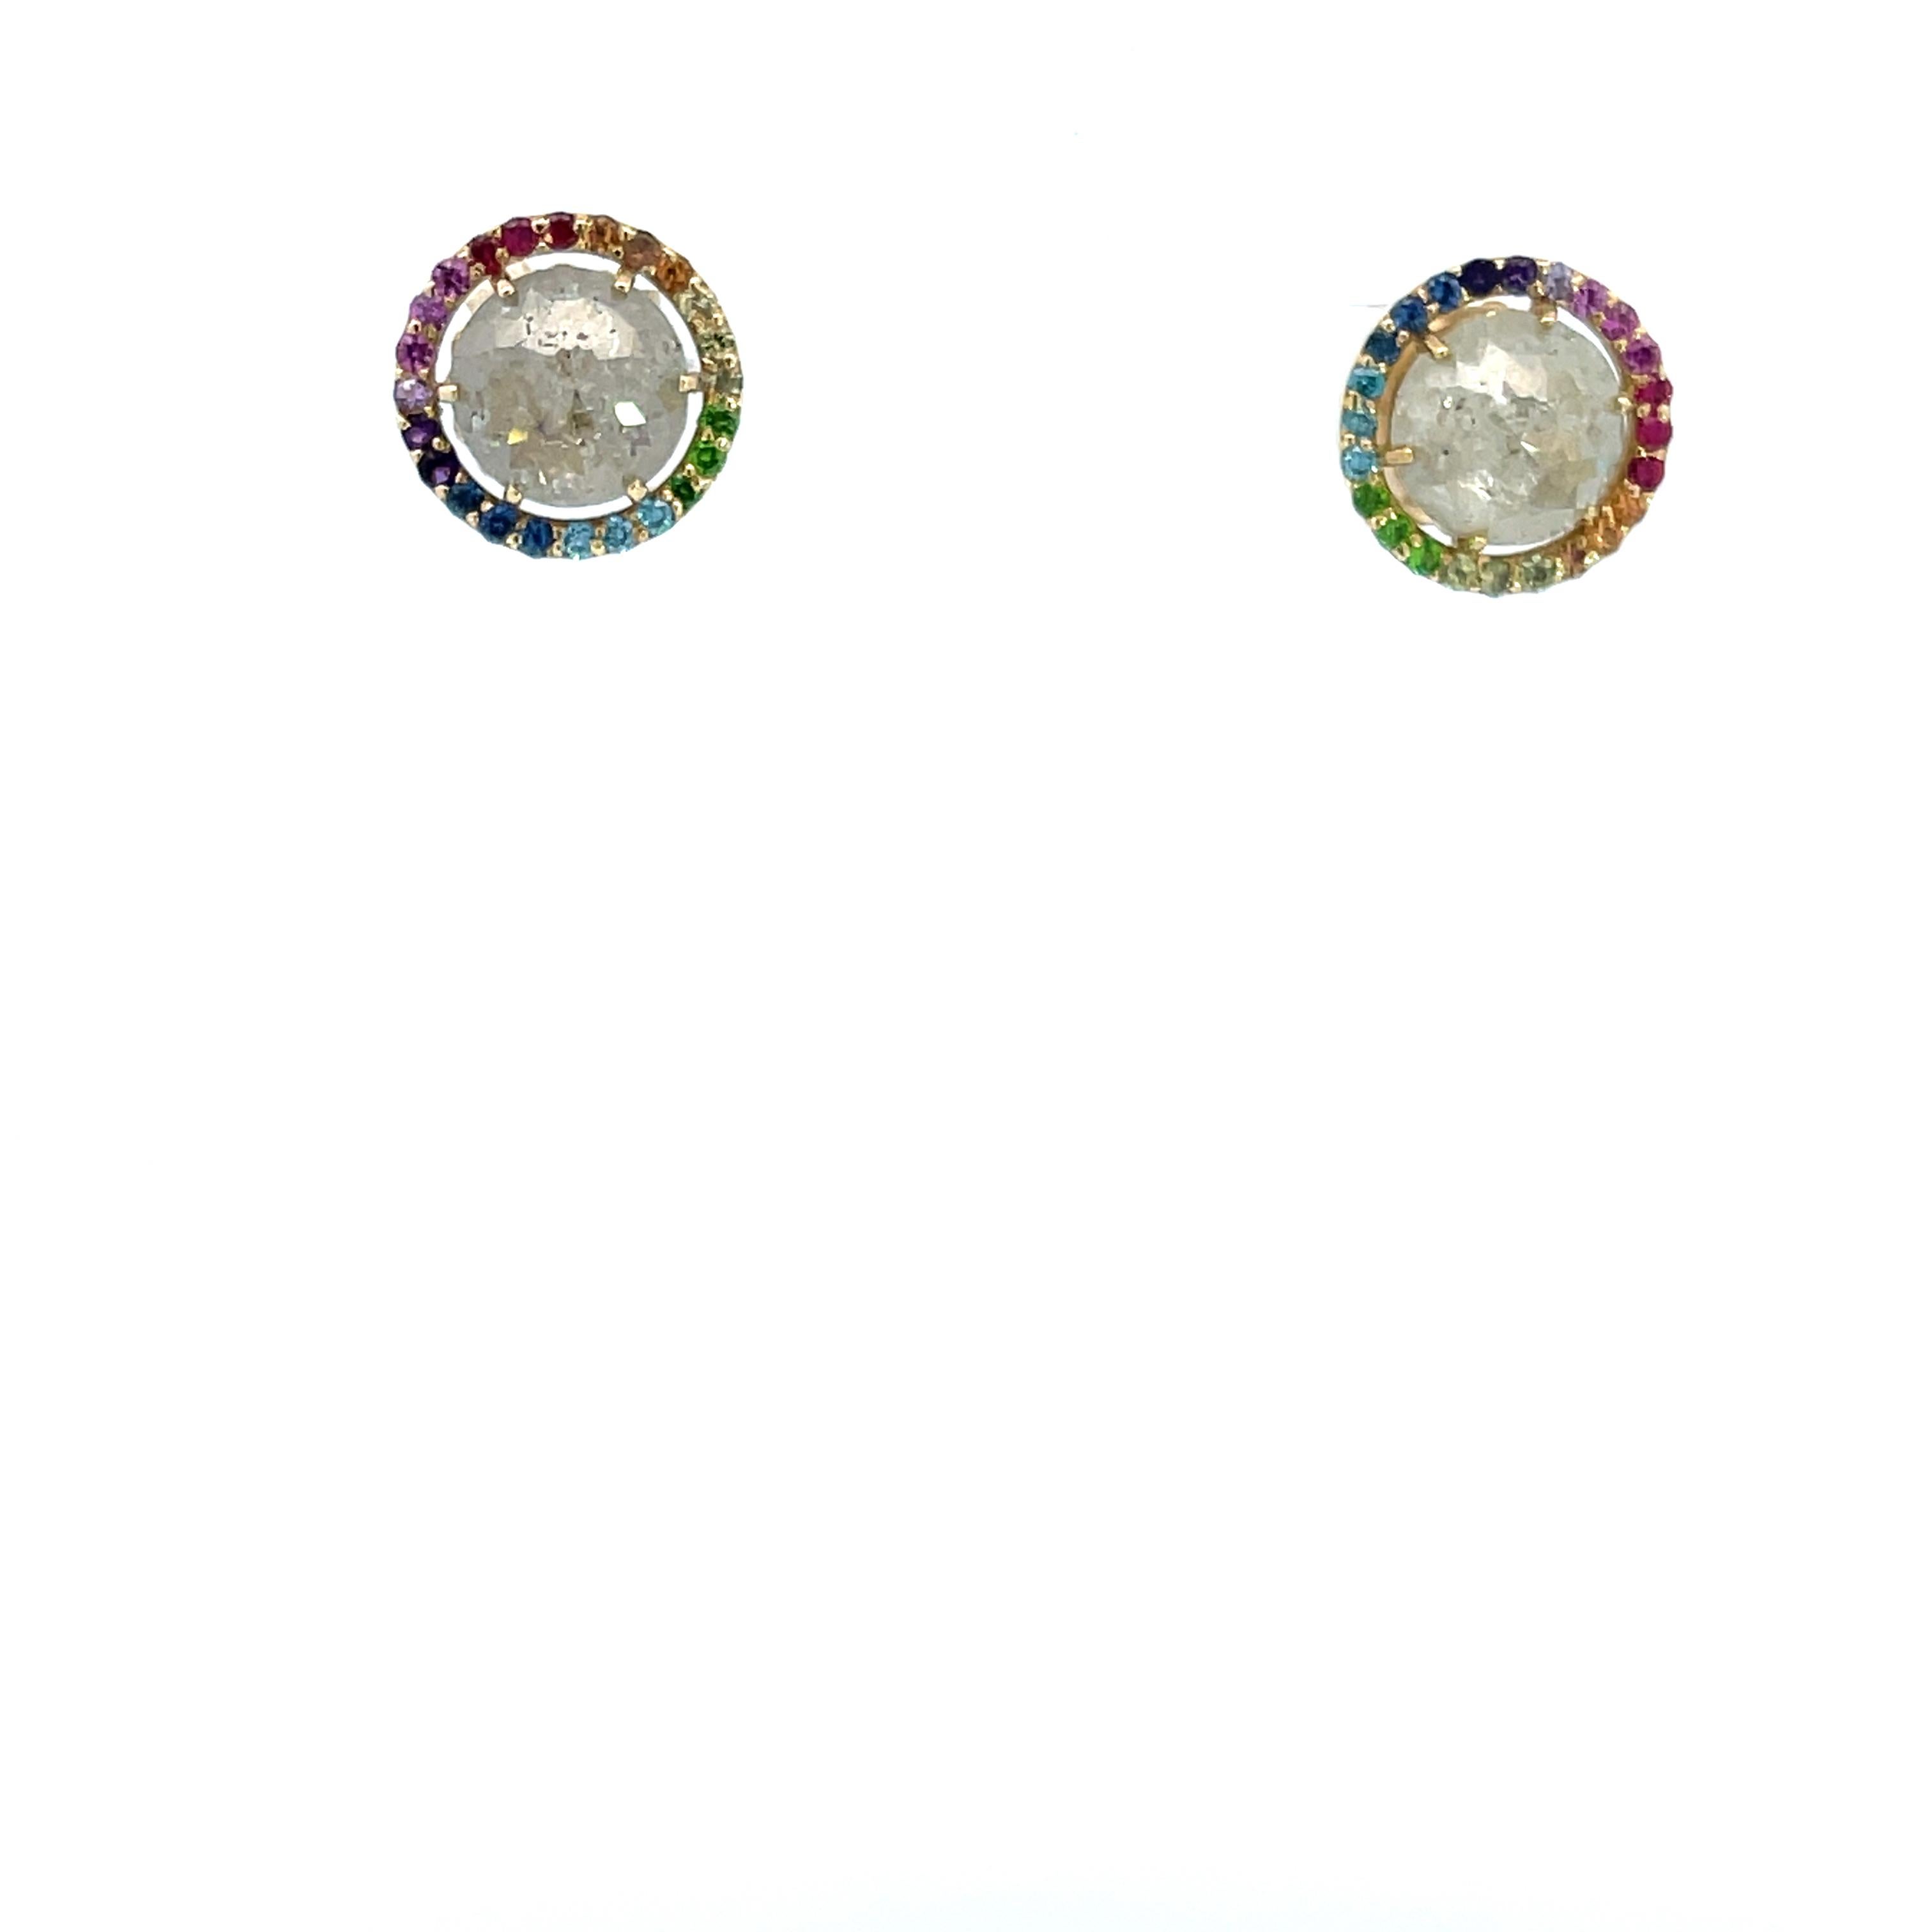 A pair of 18k yellow gold 4.58 total carat weight grey diamond stud earrings with a rainbow halo consisting of .48 total carat weight pink sapphires, orange sapphires, yellow sapphires, blue sapphires, purple sapphires, rubies, tsavorite garnets and